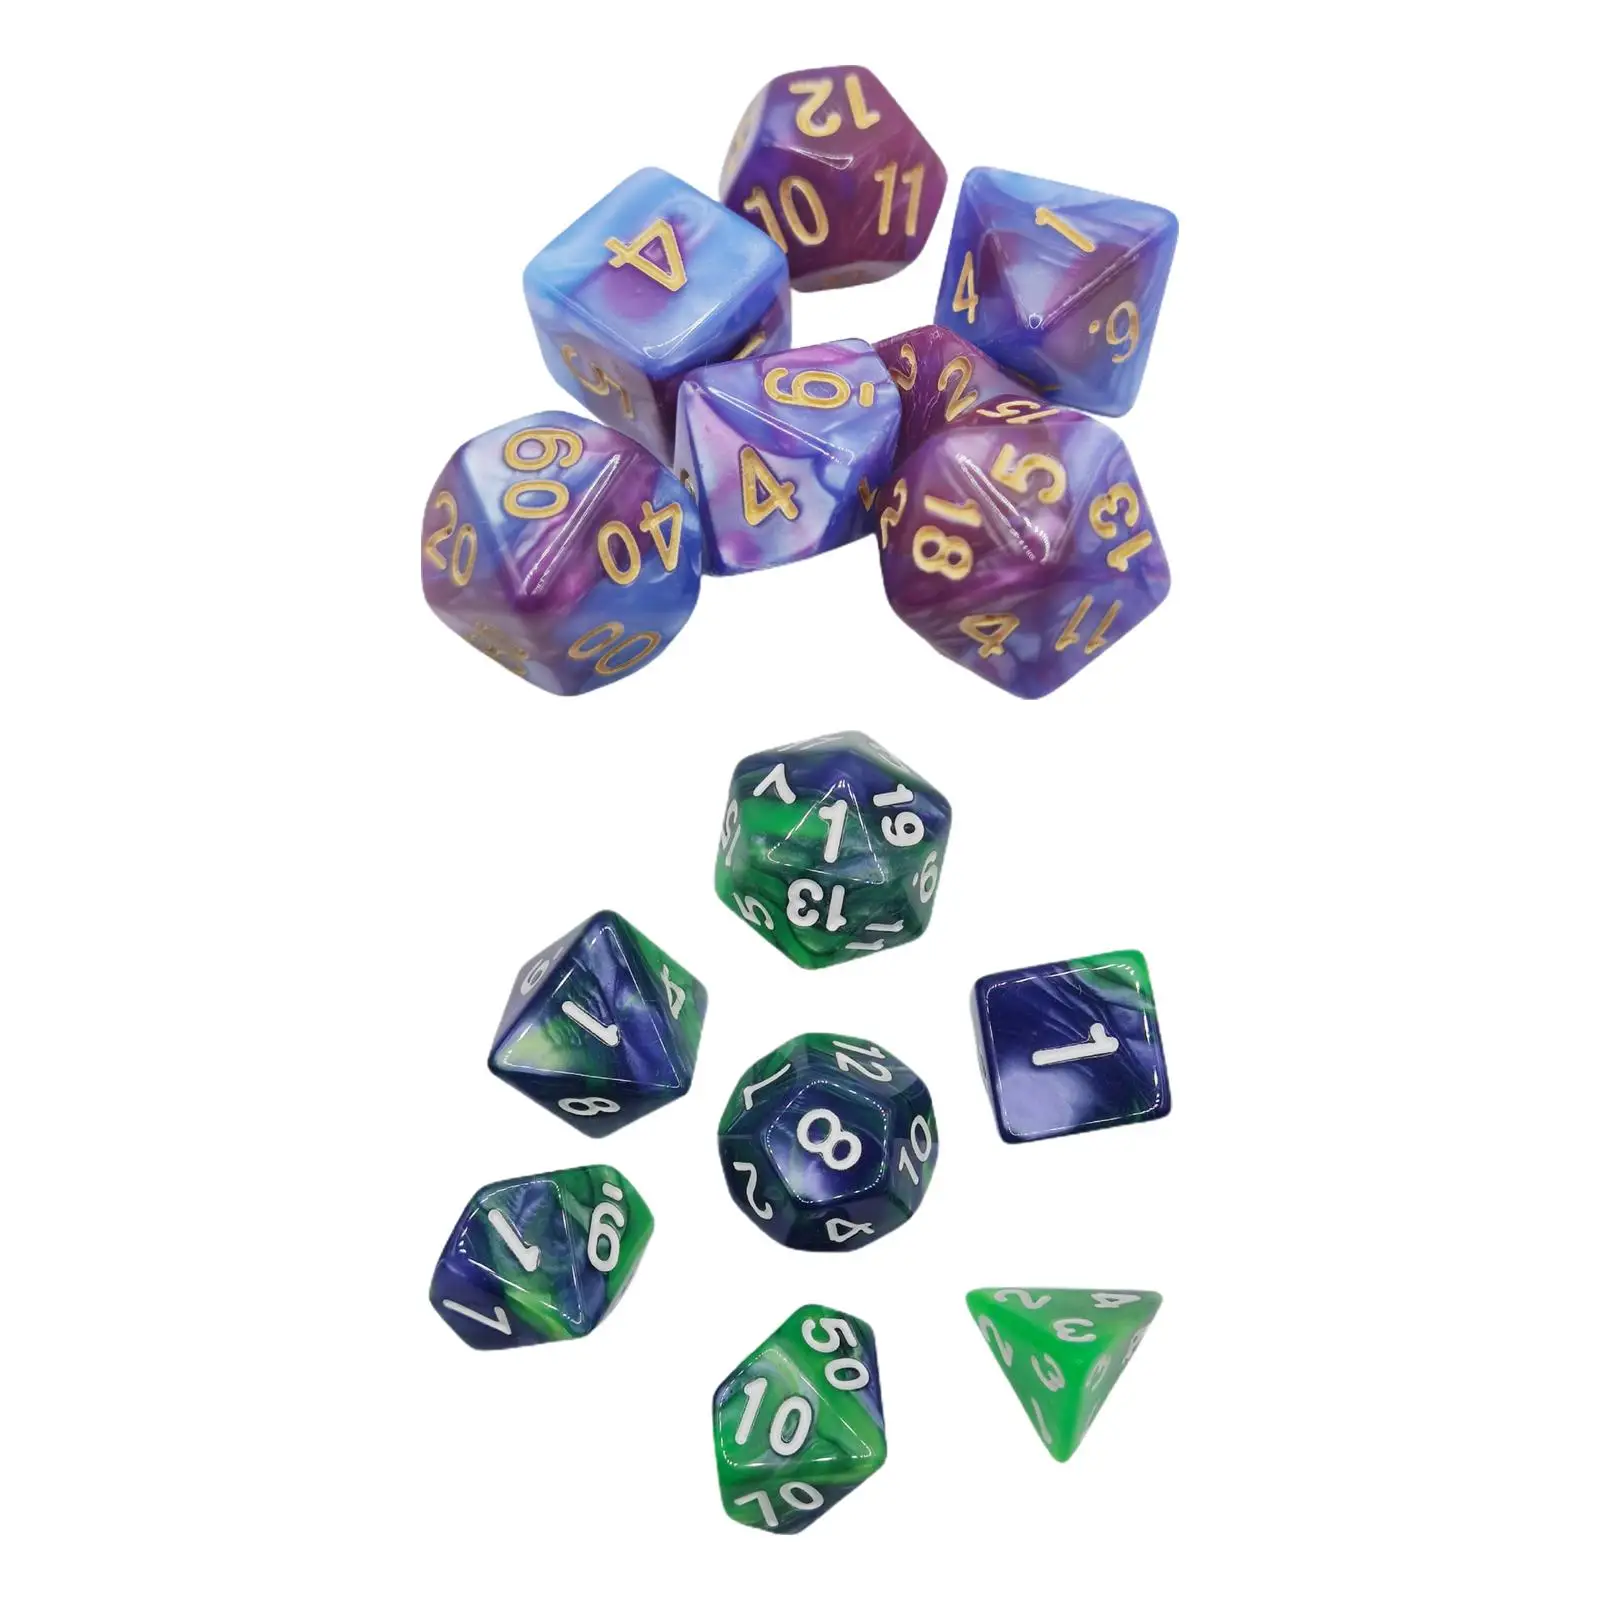 7 Pieces Polyhedral Dice Set D6 D4 D8 D10 D12 D20 Double Colors Round Corner for Role Playing Table Board Games Math Learning